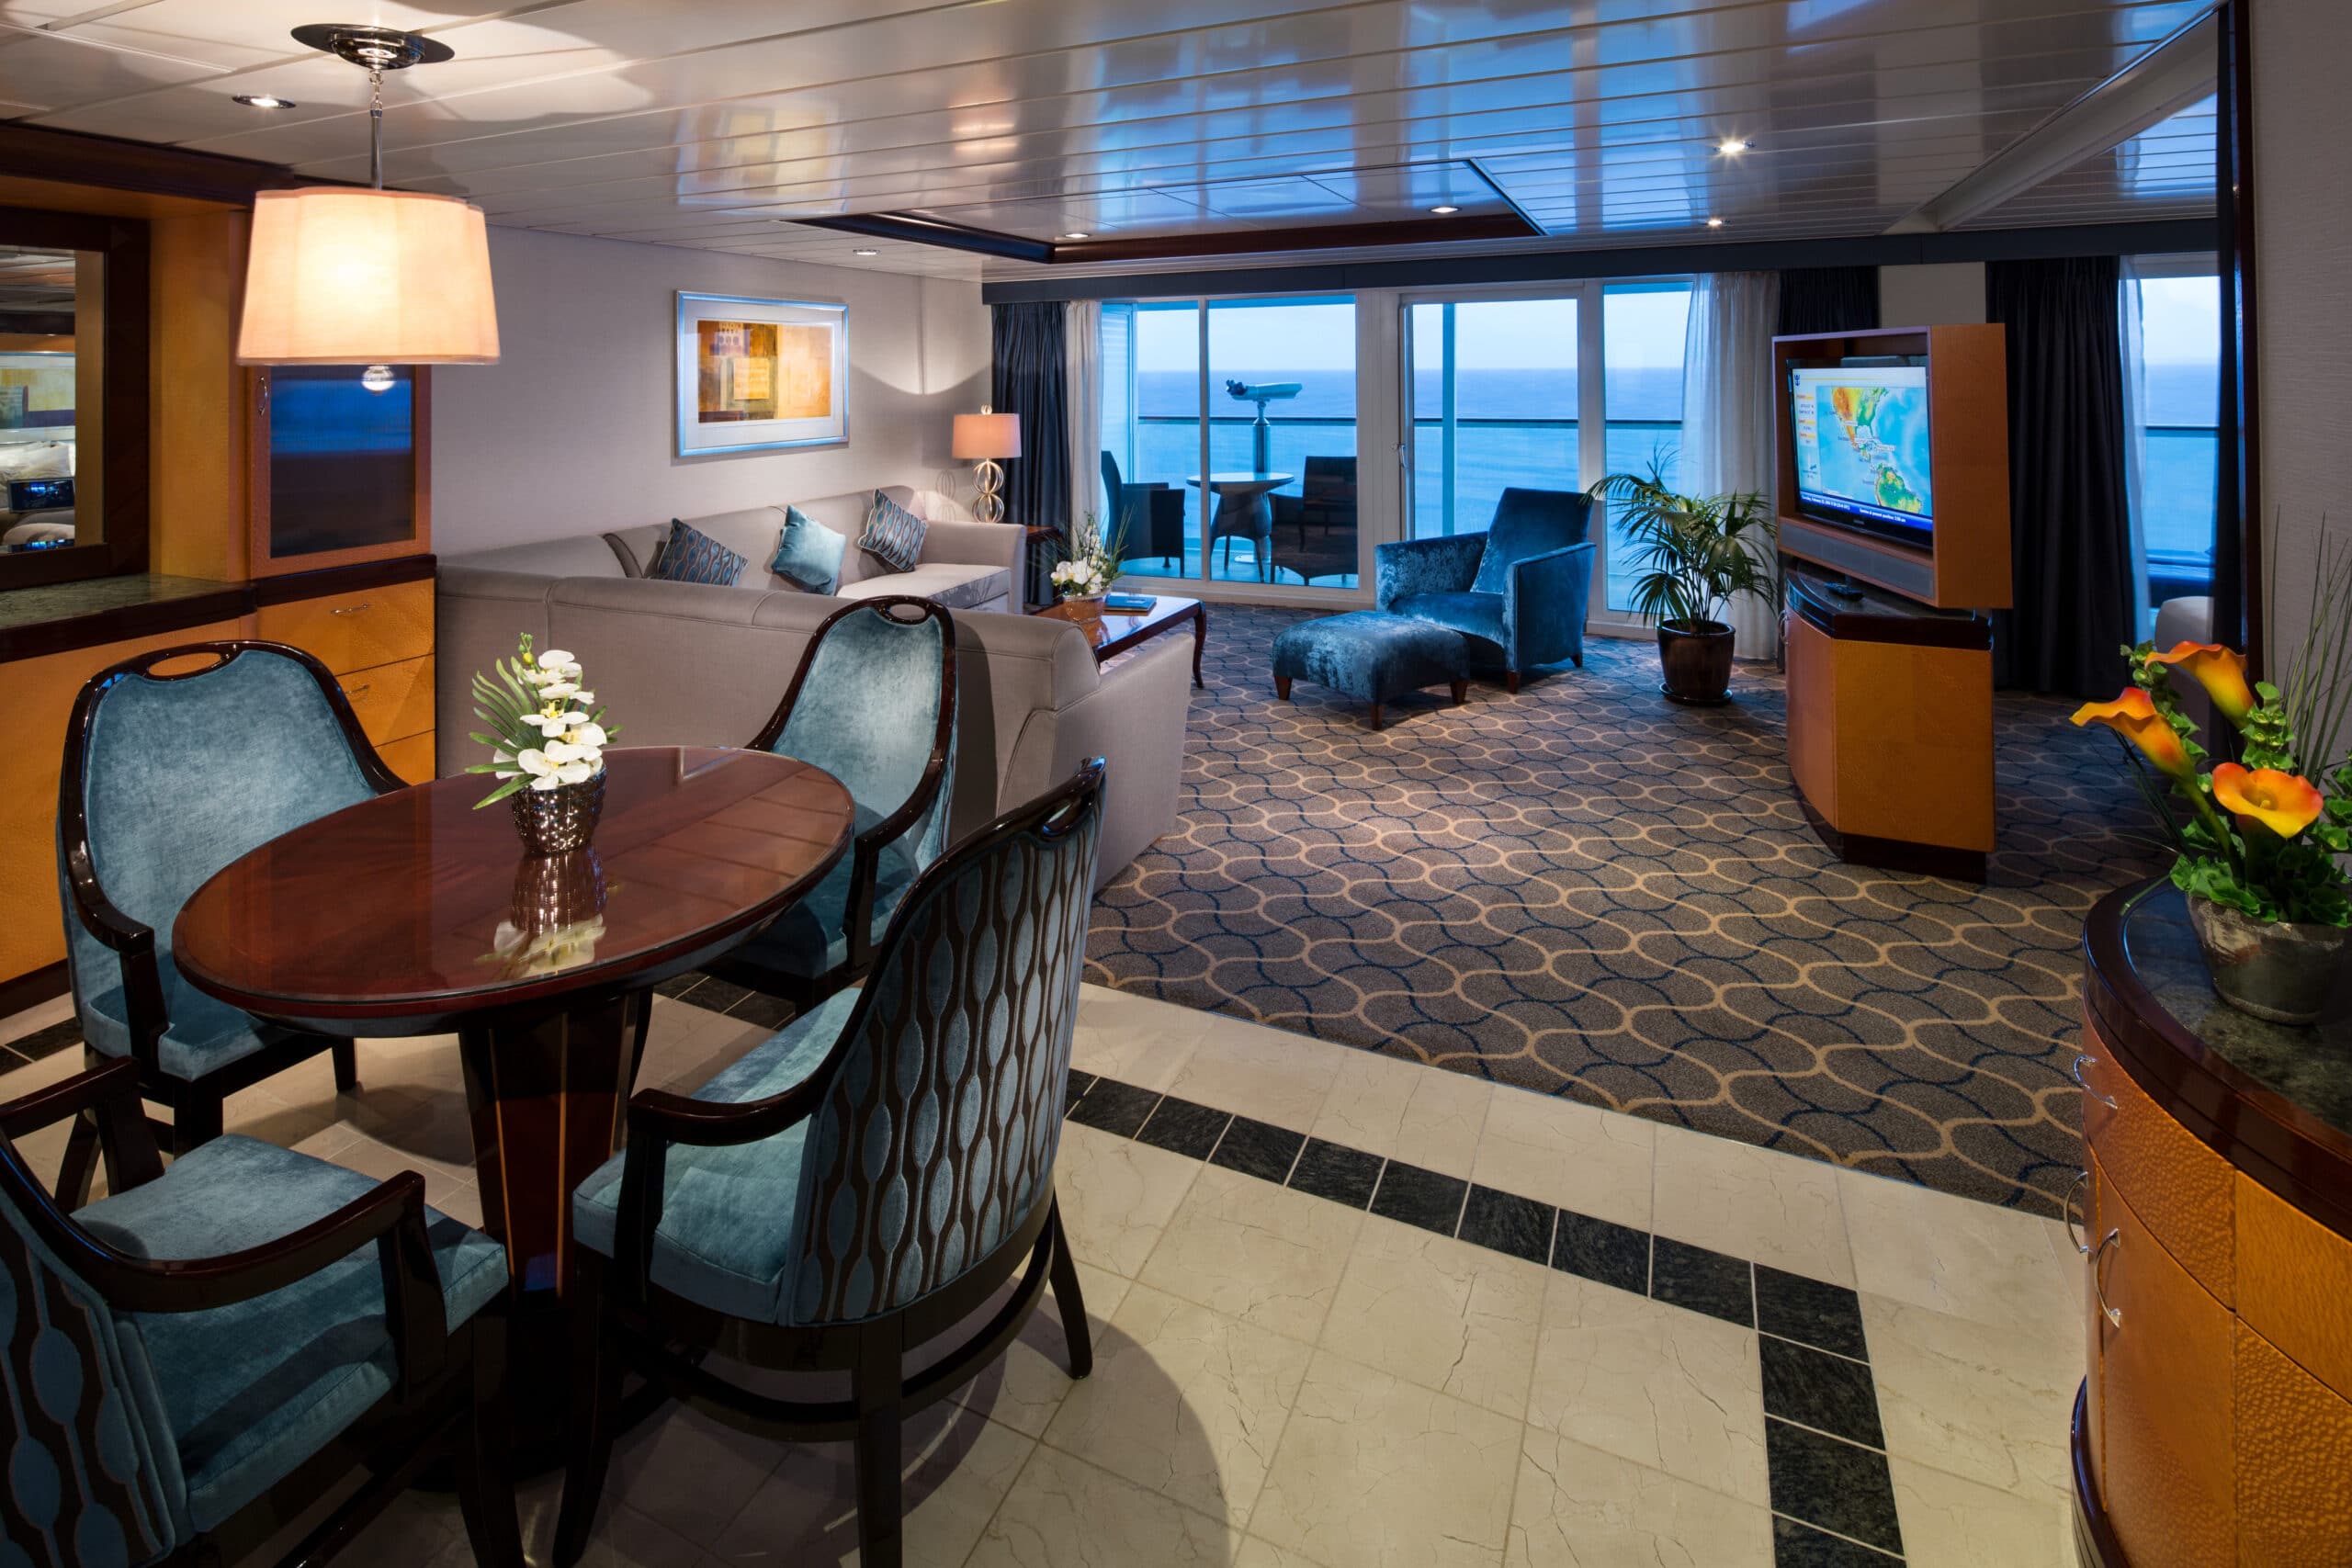 Royal-Caribbean-International-Freedom-of-the-Seas-Liberty-of-the Seas-Independence-of-the-seas-schip-cruiseschip-categorie OS-Owner Suite